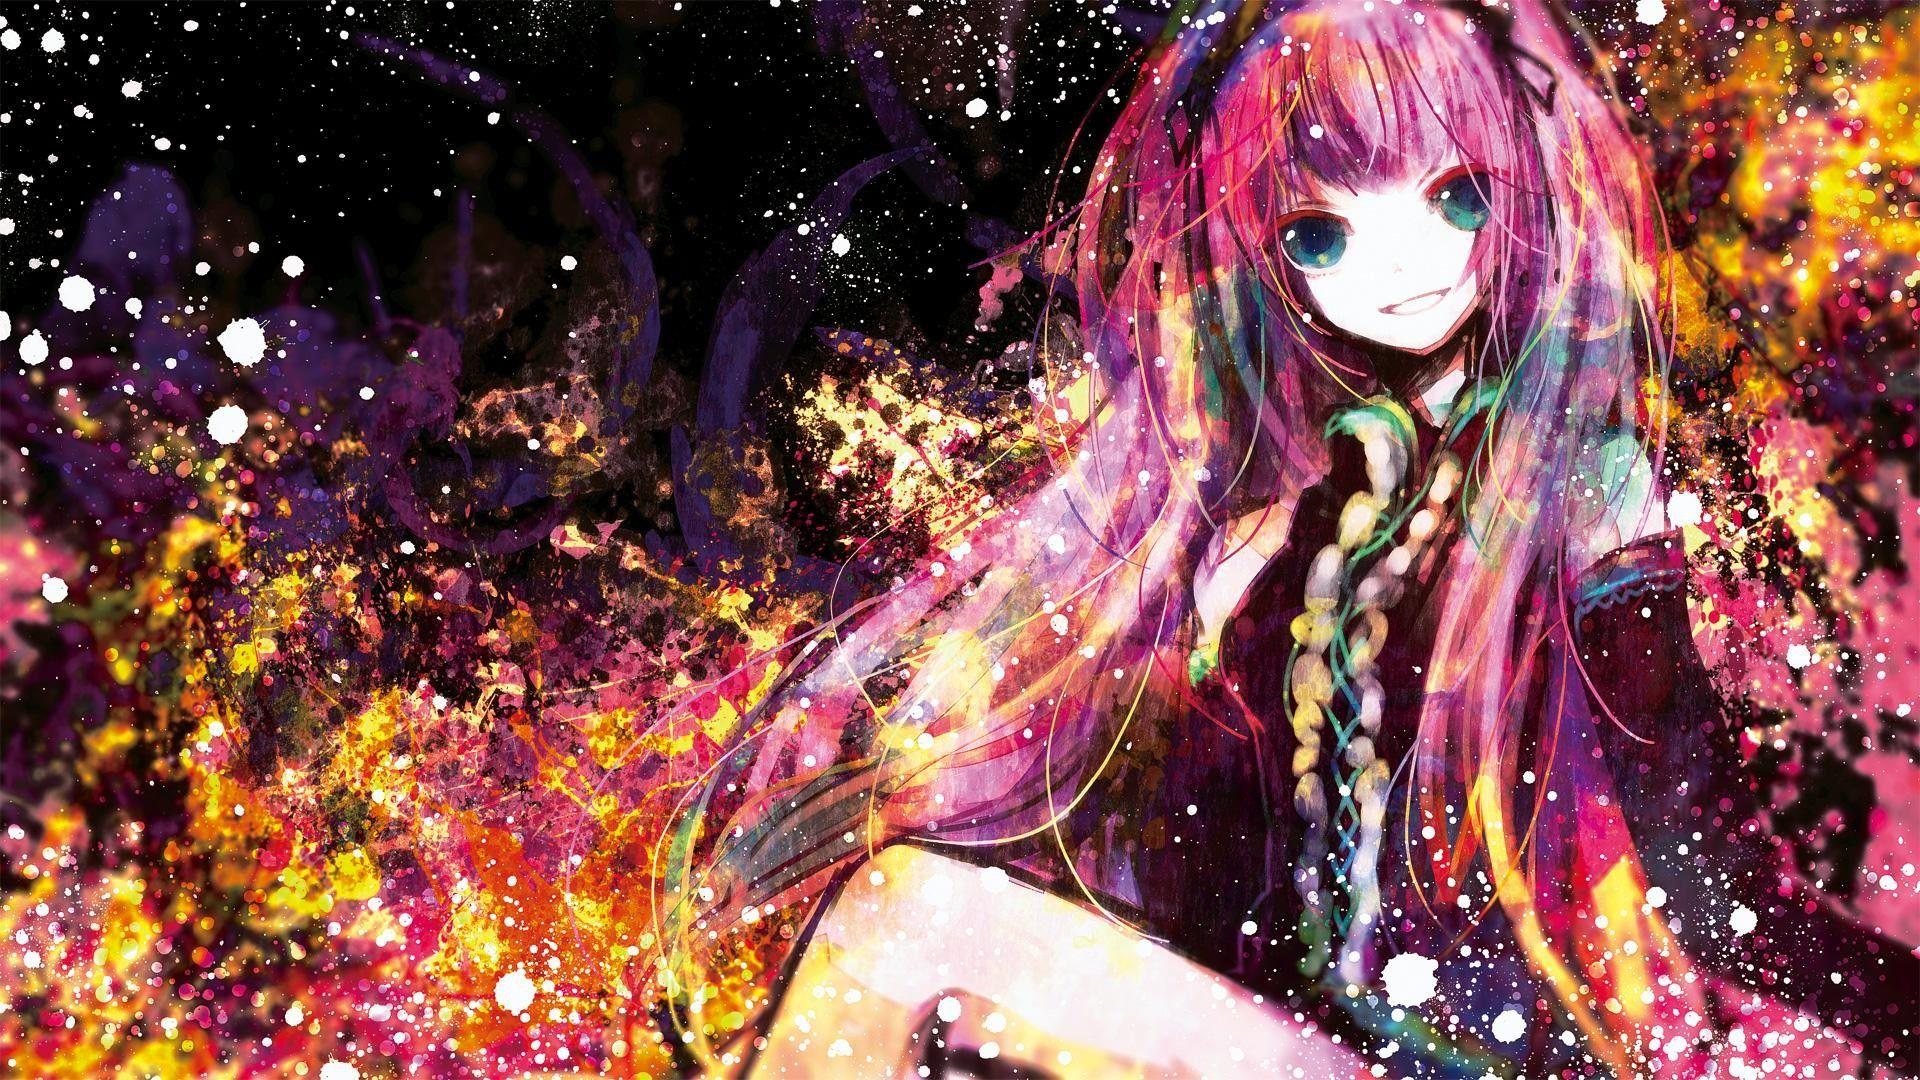 Abstract Anime Wallpapers - Top Free Abstract Anime Backgrounds